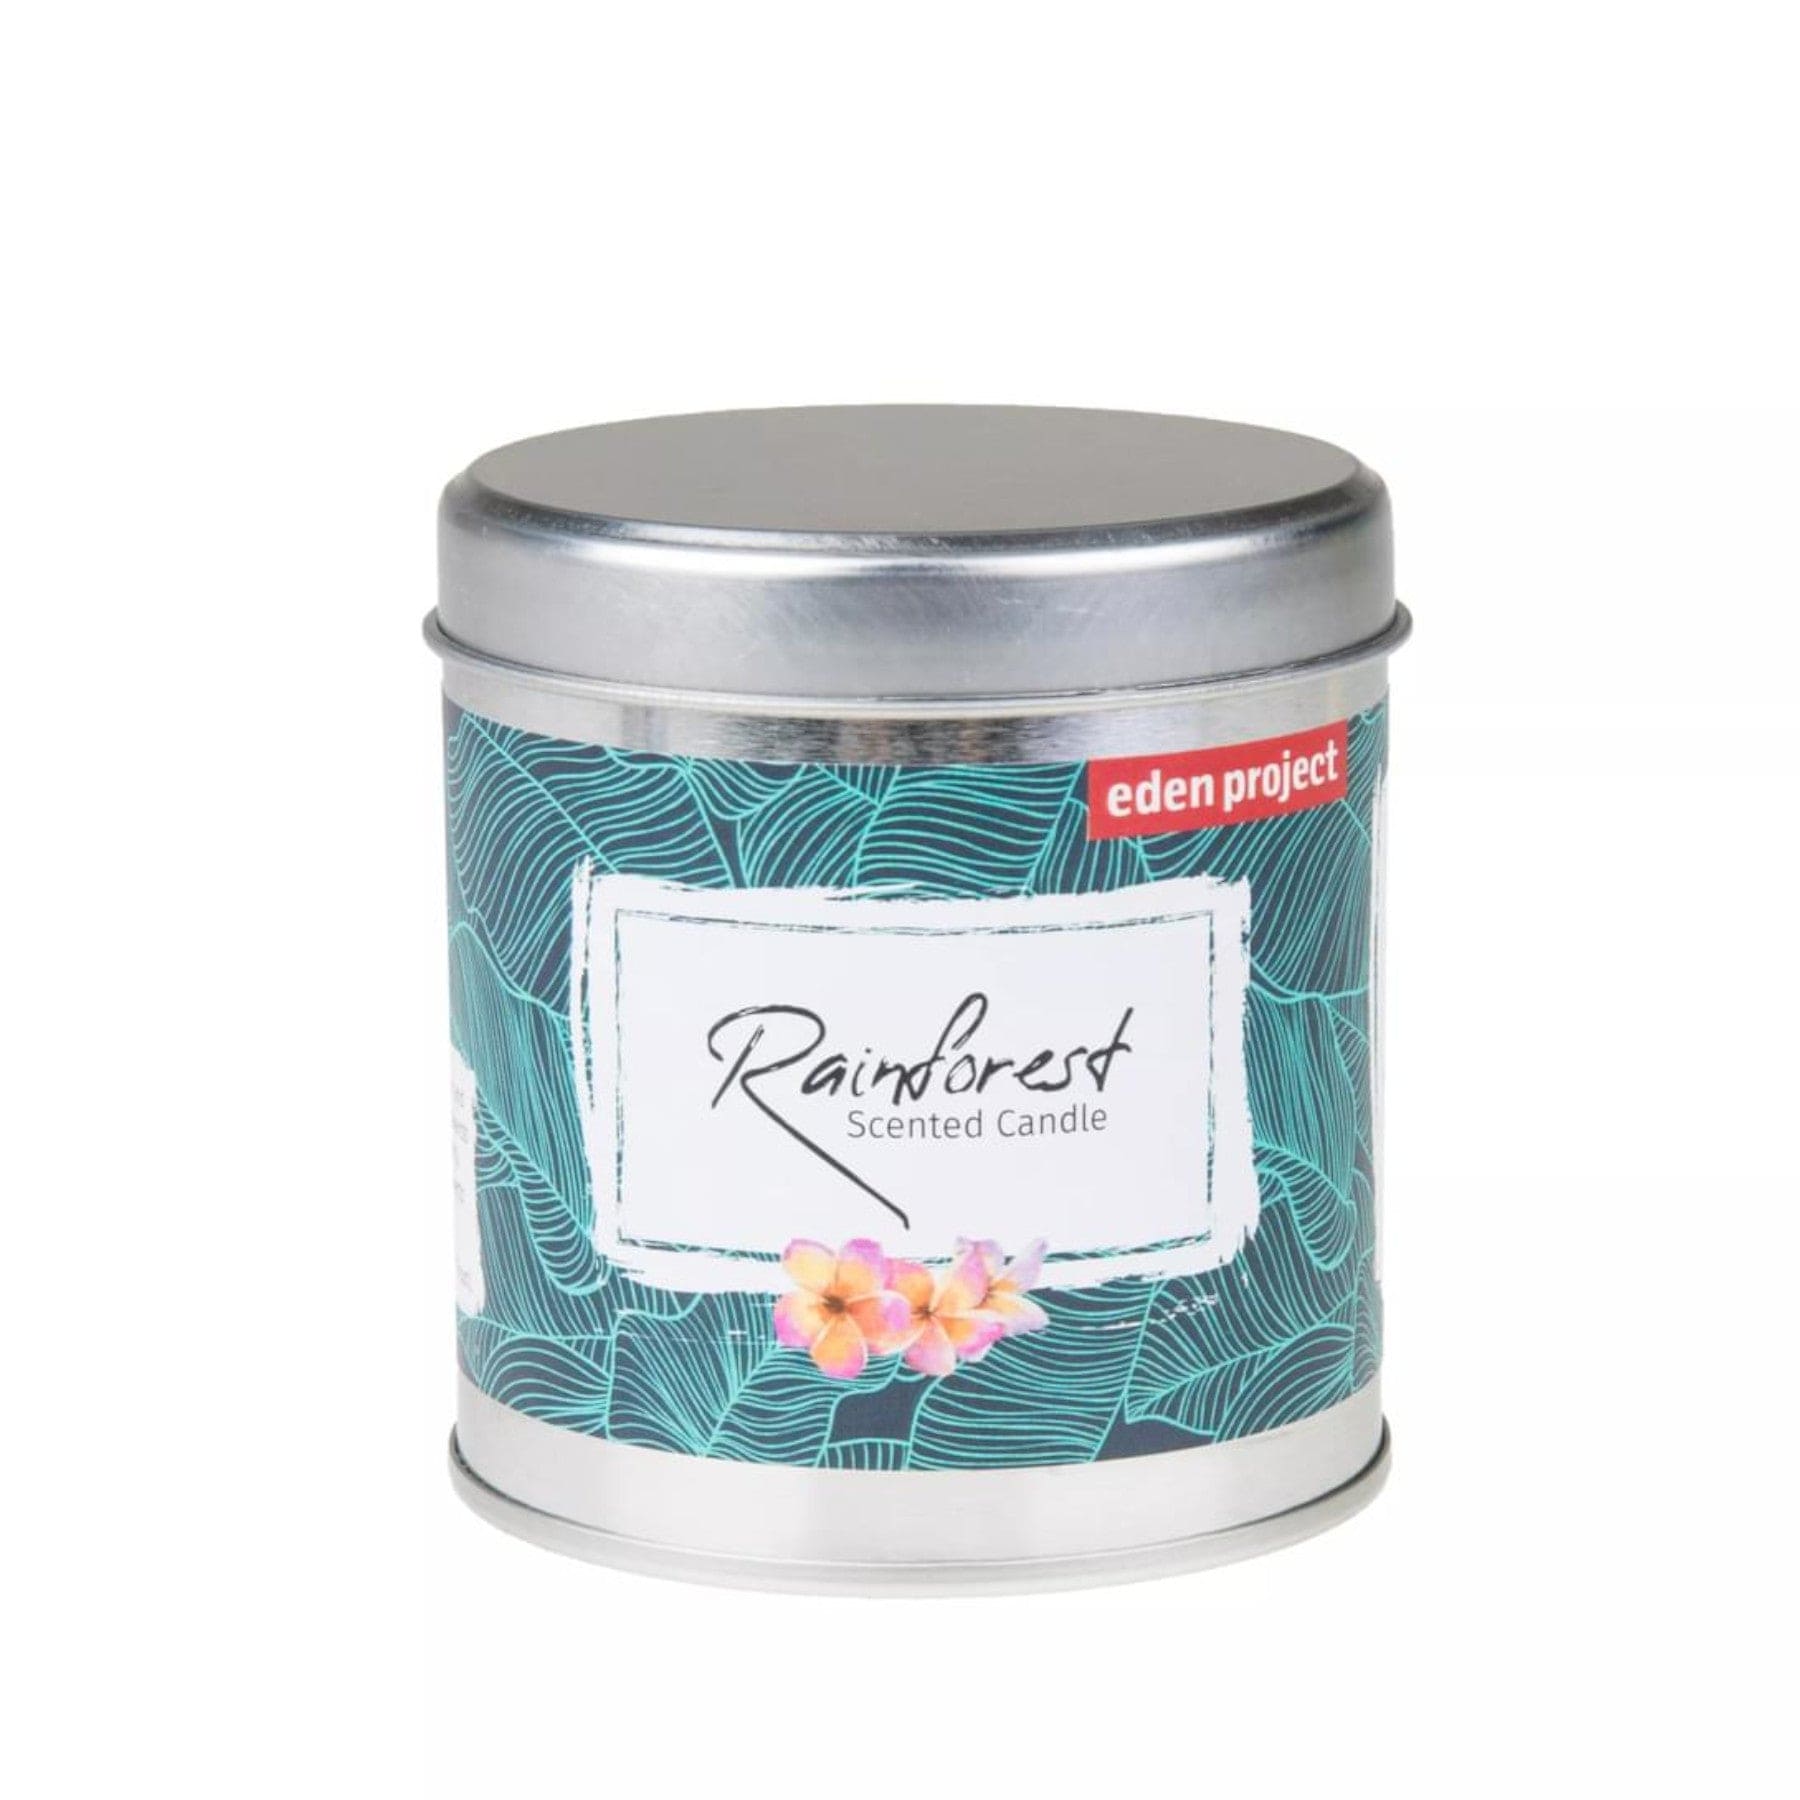 Rainforest scented tin candle